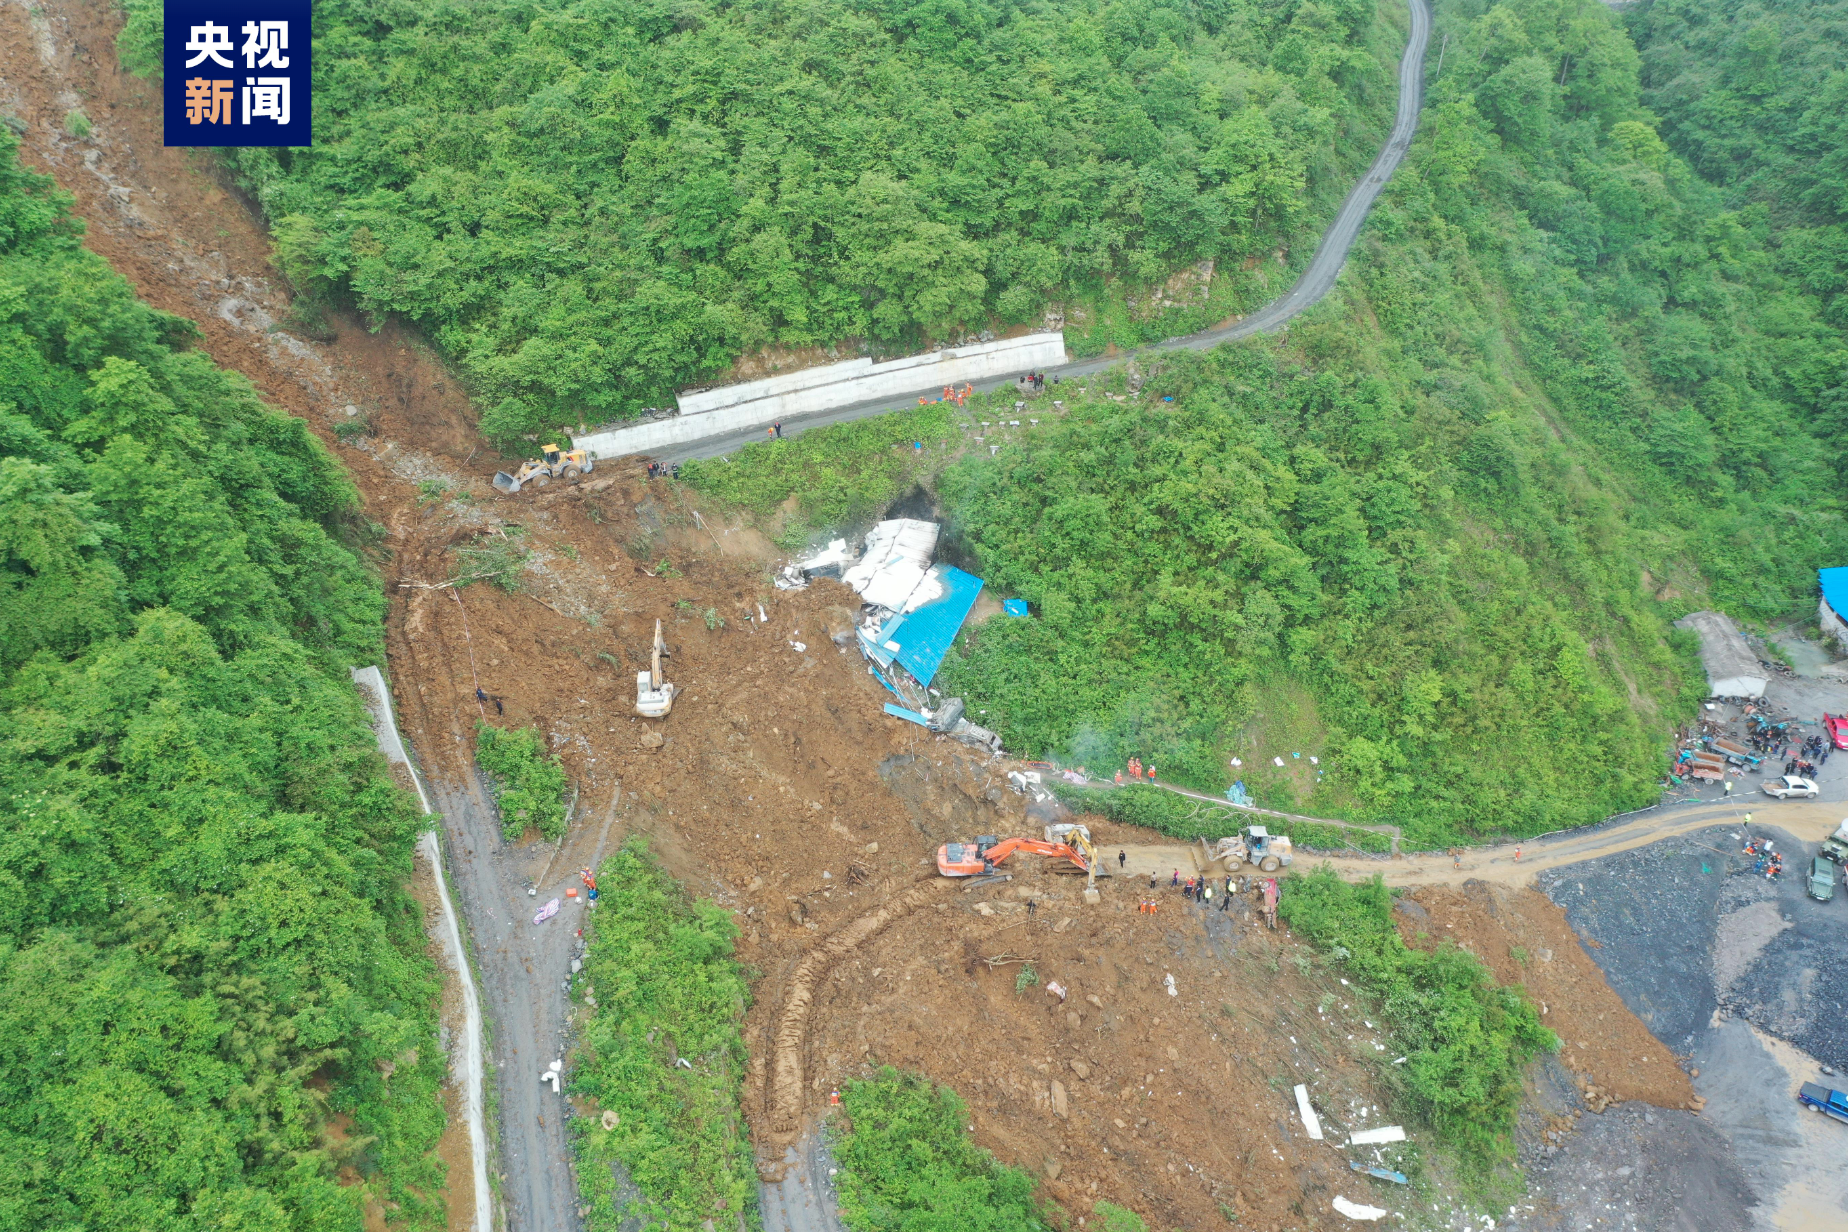 An aerial view of the accident scene in Leshan on 4 June 2023